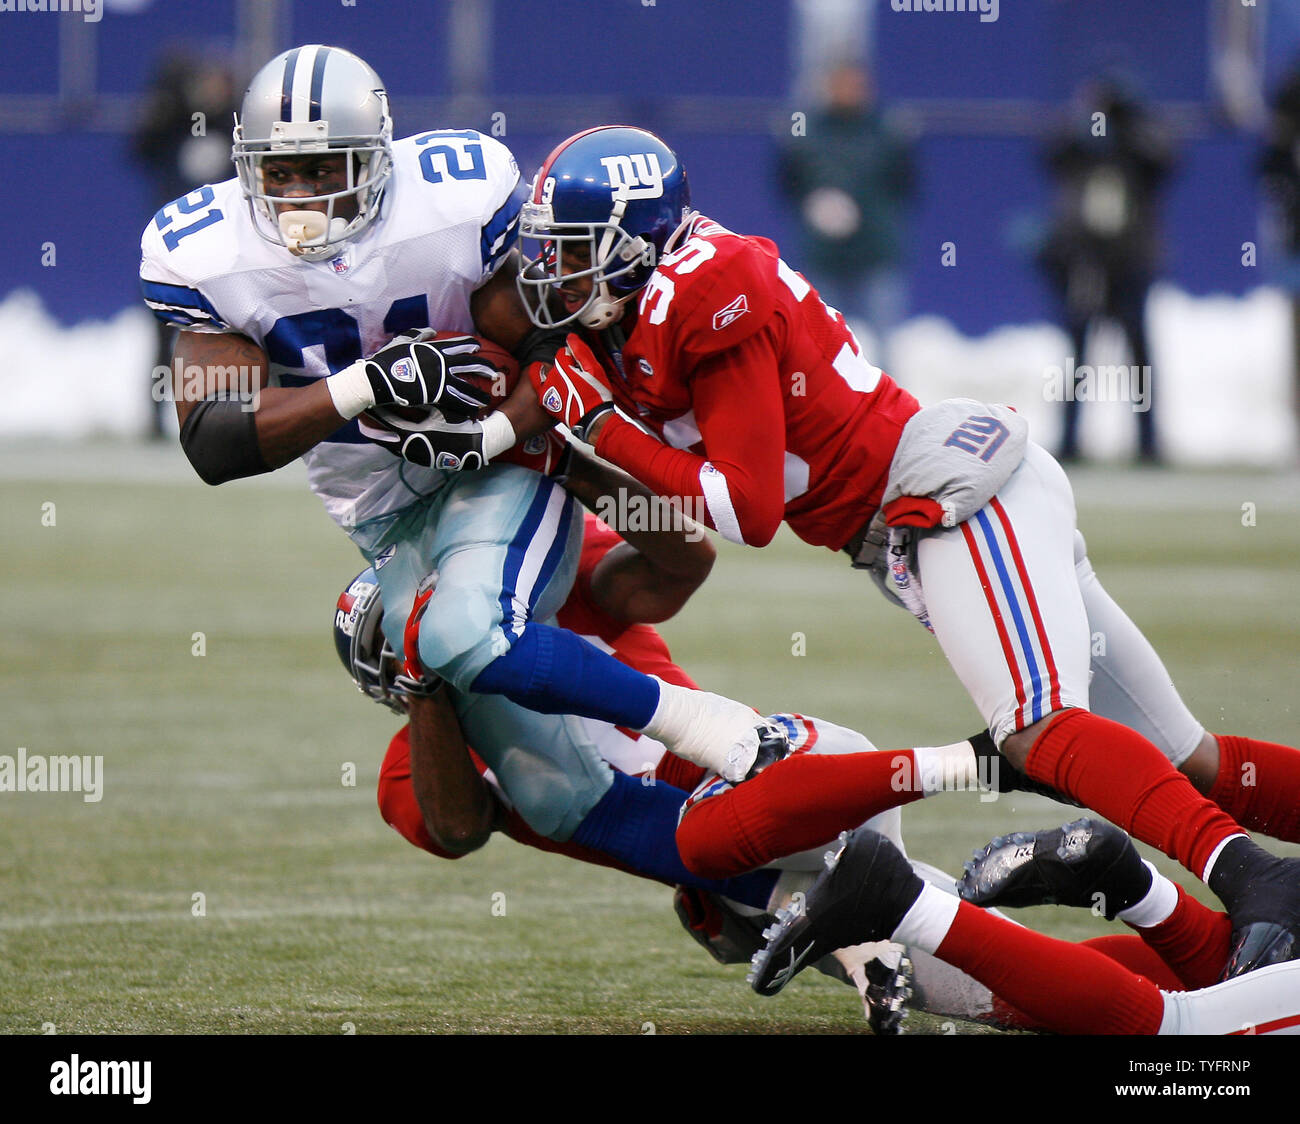 Dallas Cowboys running back Julius Jones gets hit by New York Giants  defender Curtis Deloatch in week 13 at Giants Stadium in East Rutherford,  New Jersey on December 4, 2005. The New